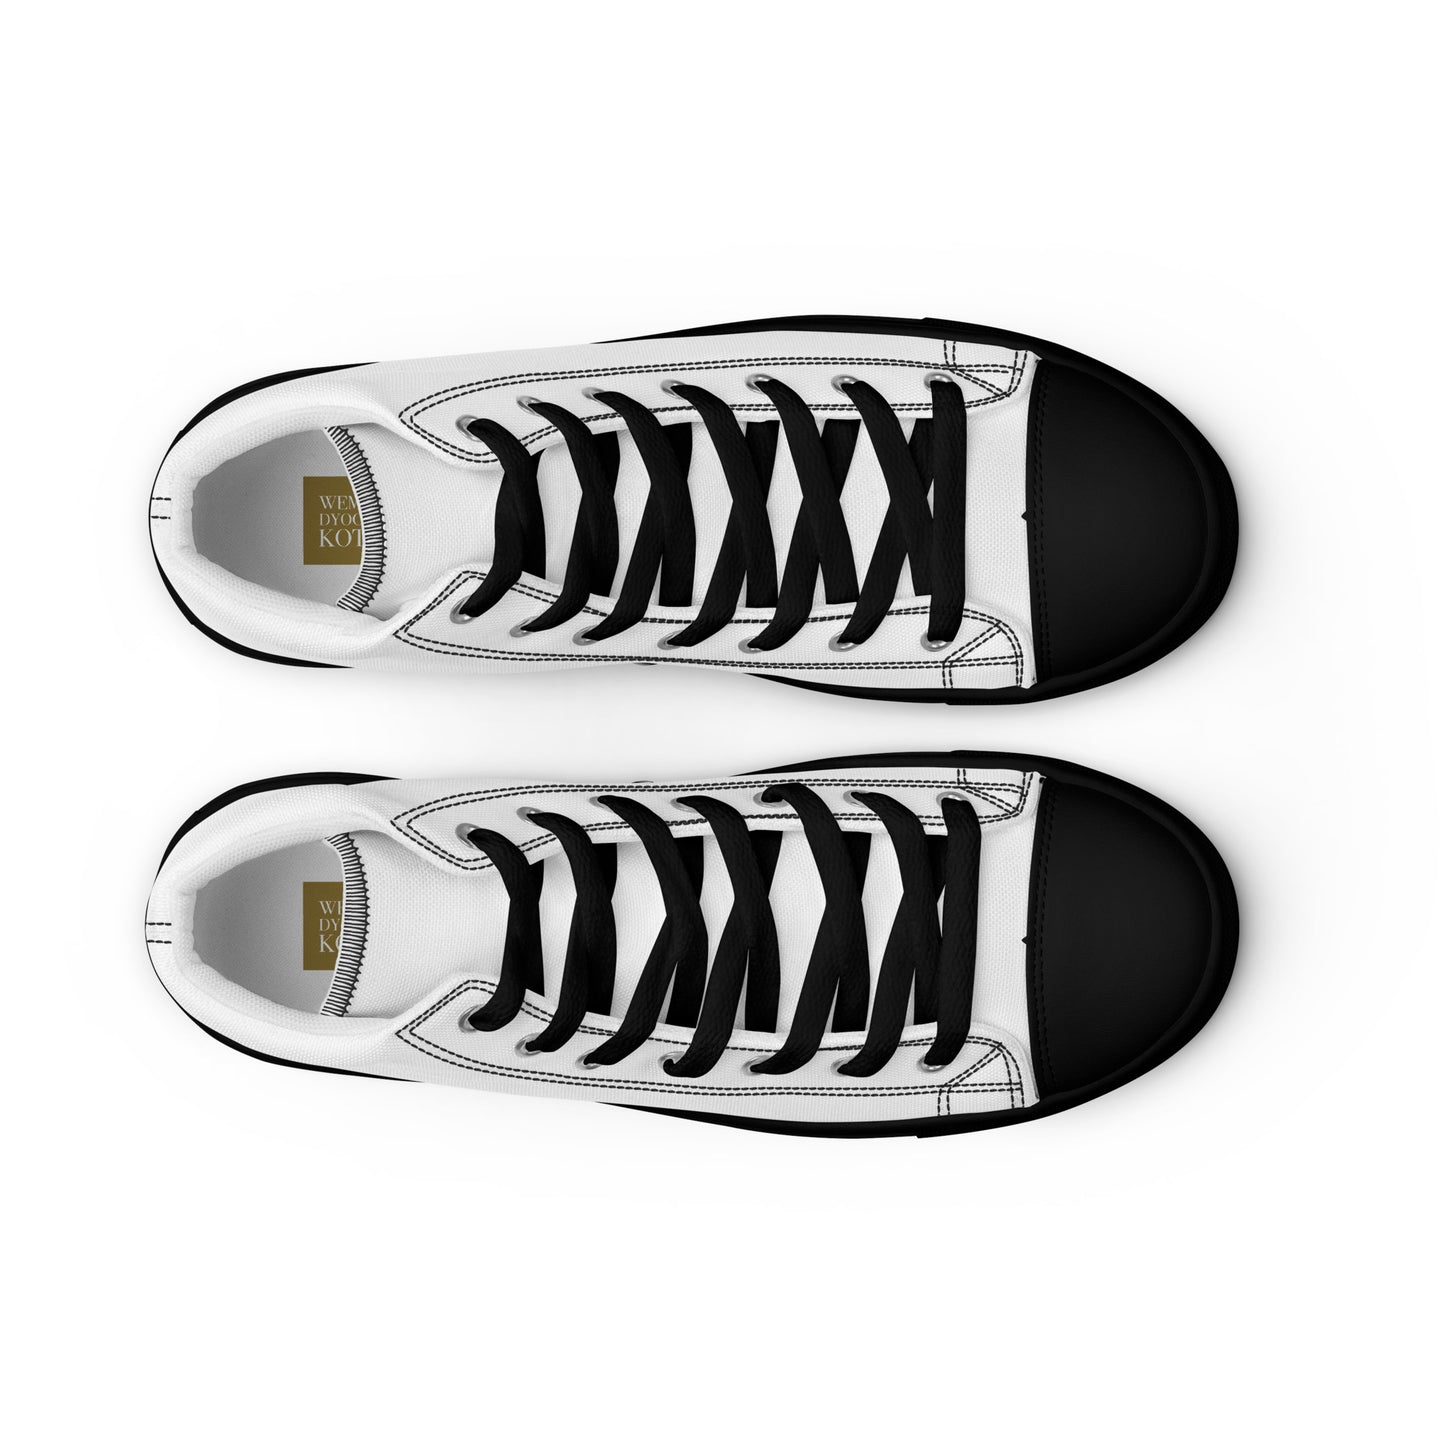 White Black - Sustainably Made Men's High Top Canvas Shoes